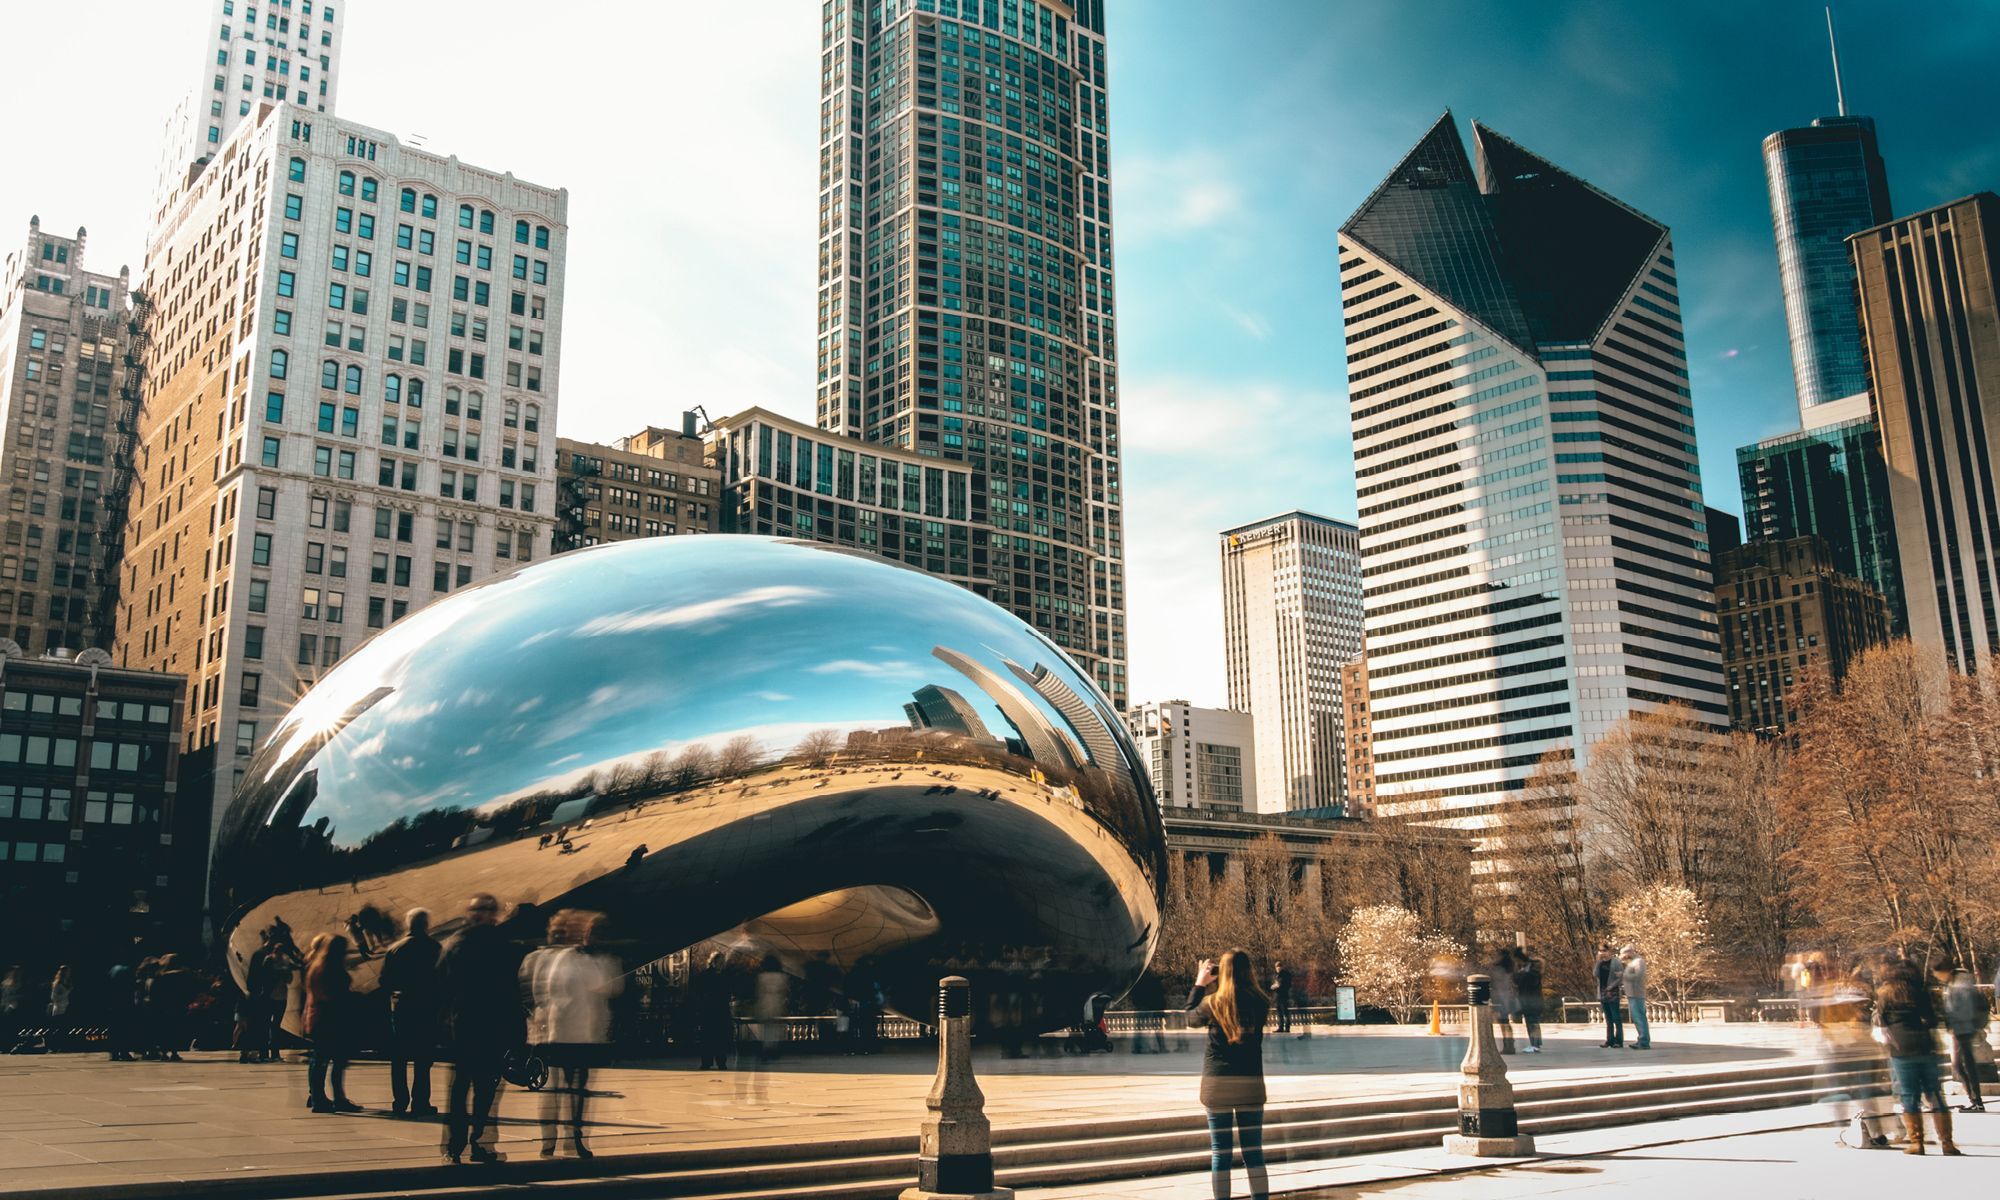 Image of Chicago's Cloudgate (The Bean) facing from the northwest. People are visible, taking pictures of the structure, and buildings can be seen in the background. 